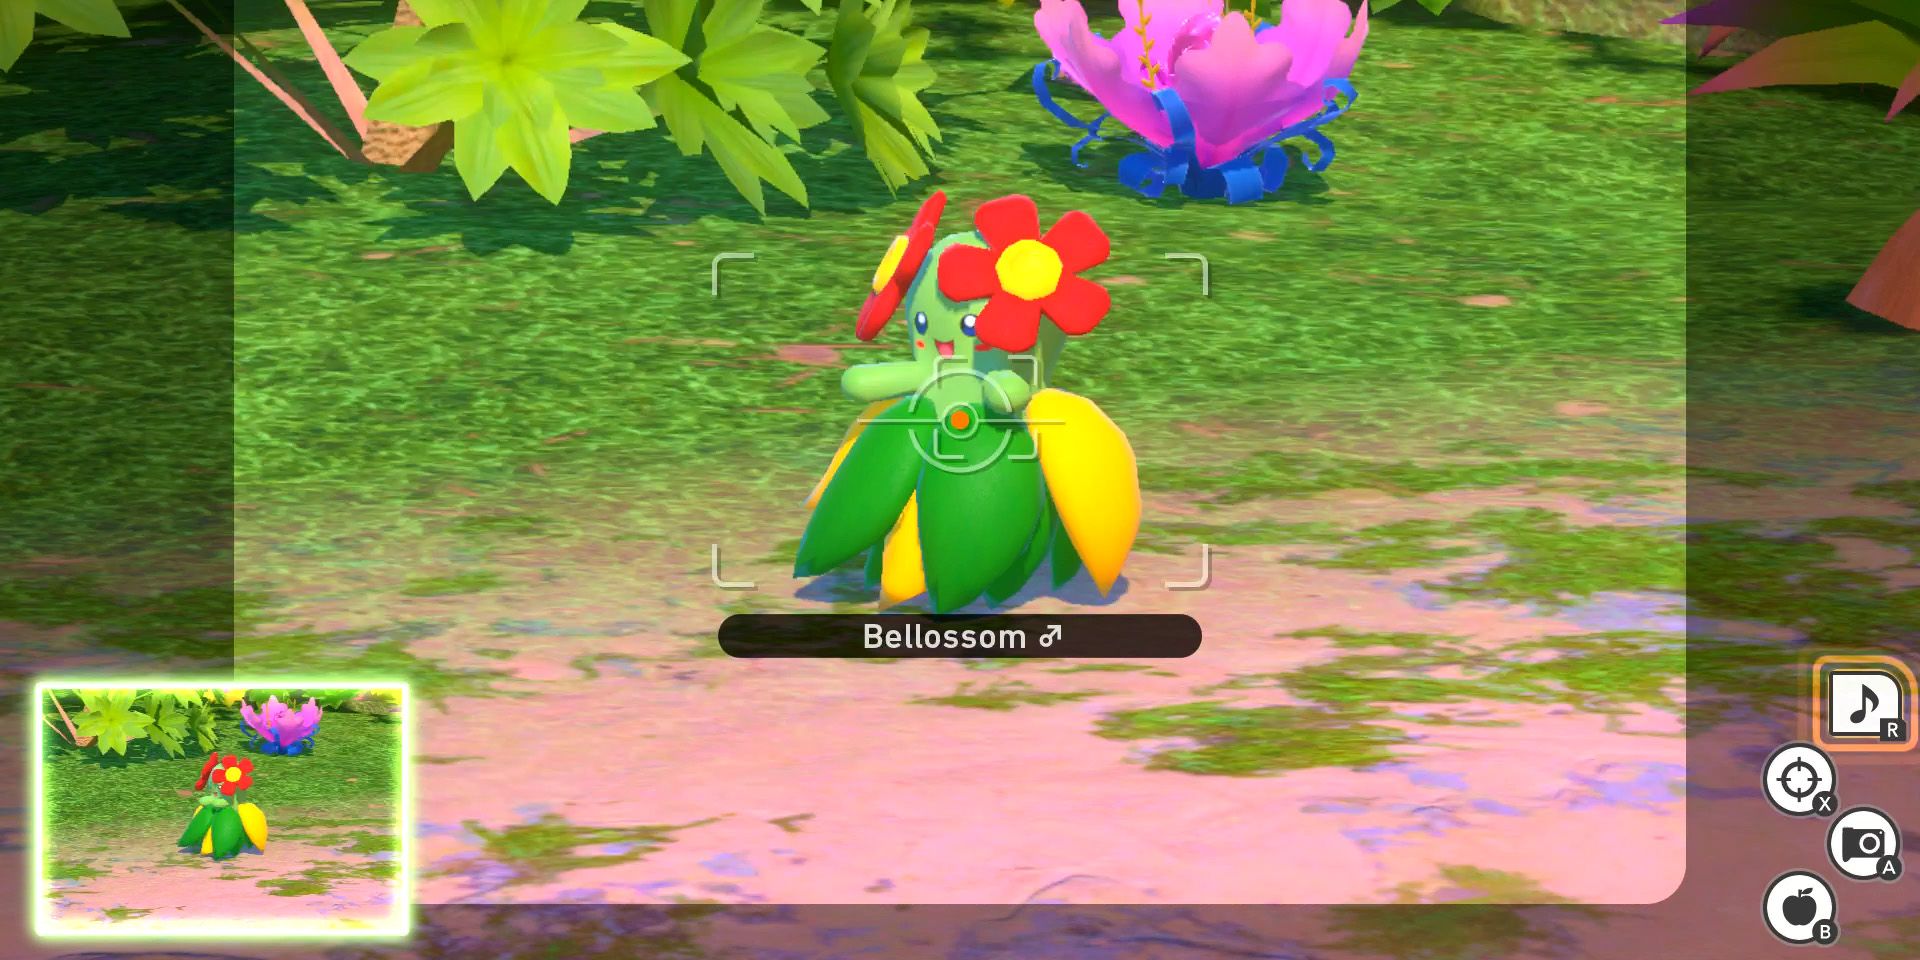 Bellossom dances after the player uses the Melody Player in New Pokemon Snap